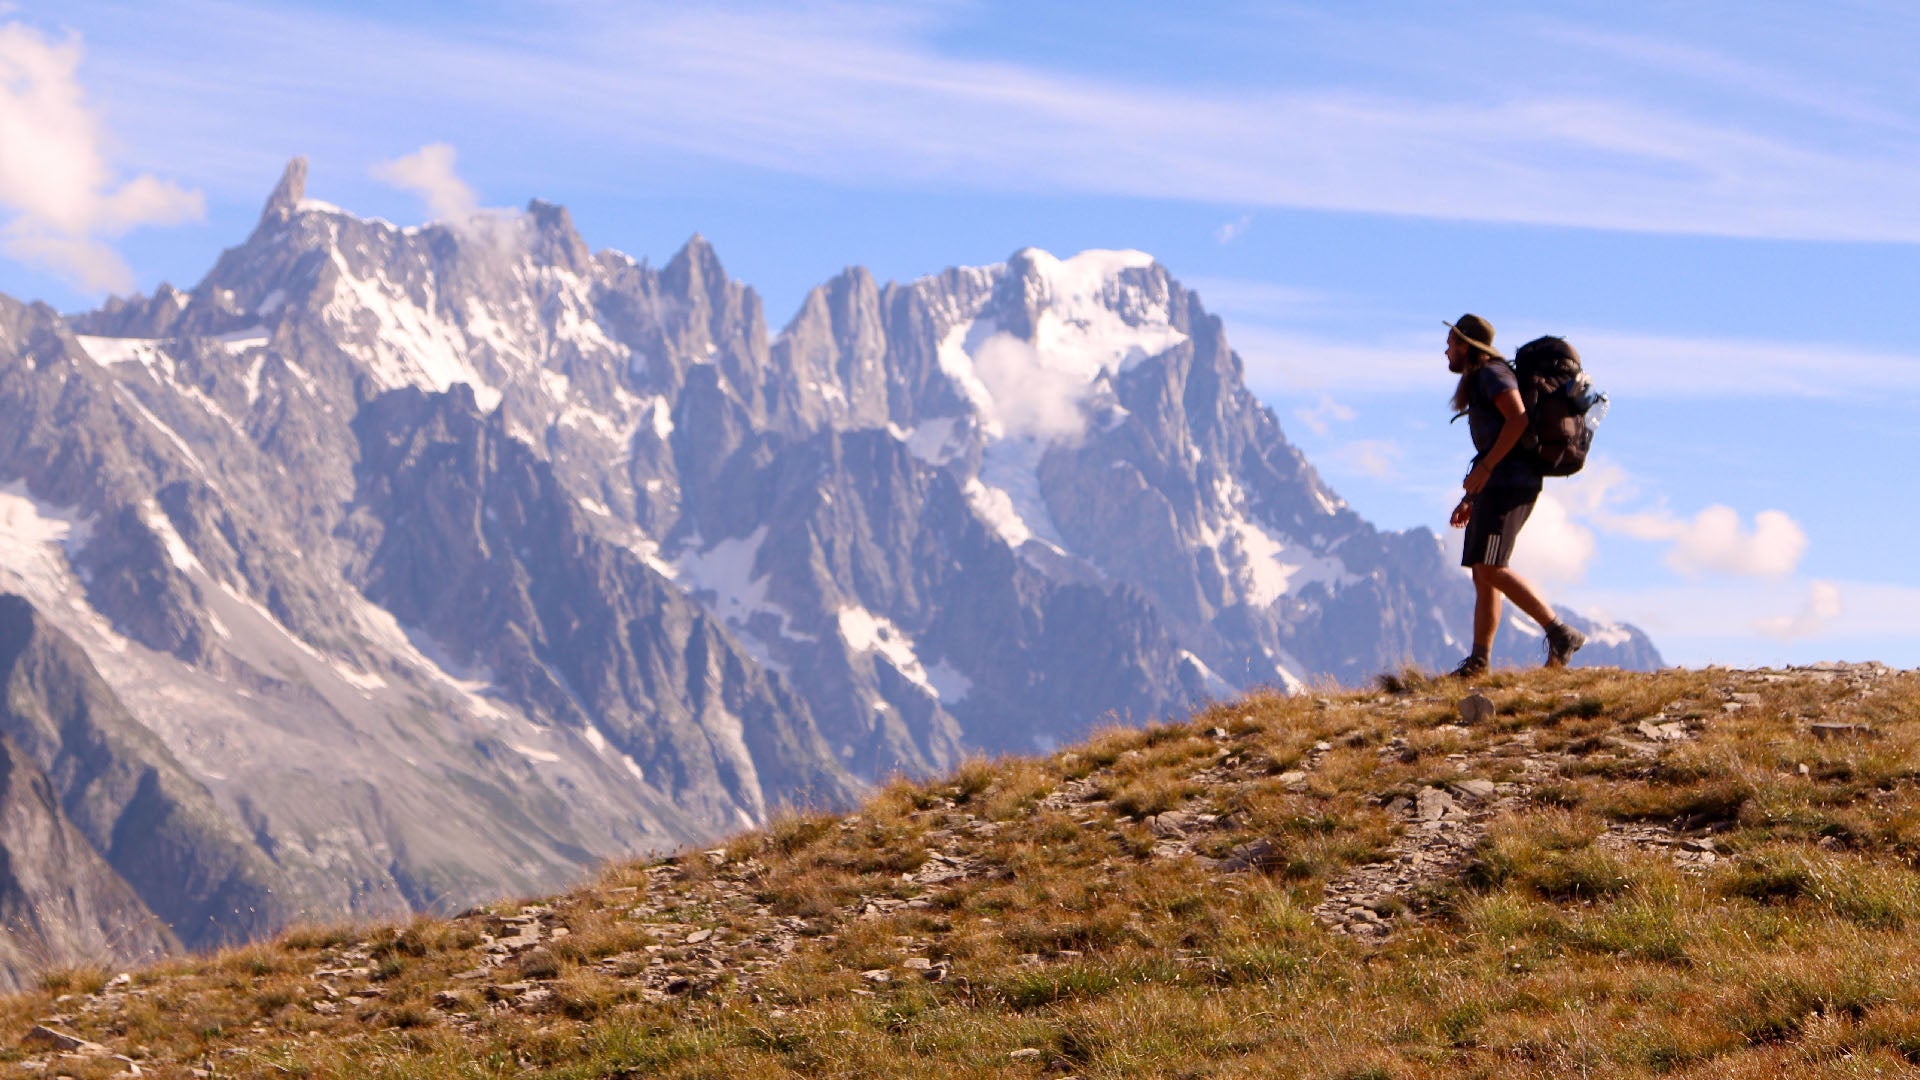 The Tour du Mont Blanc features 105 of the most breathtaking backcountry miles in the world.Matt Guenther